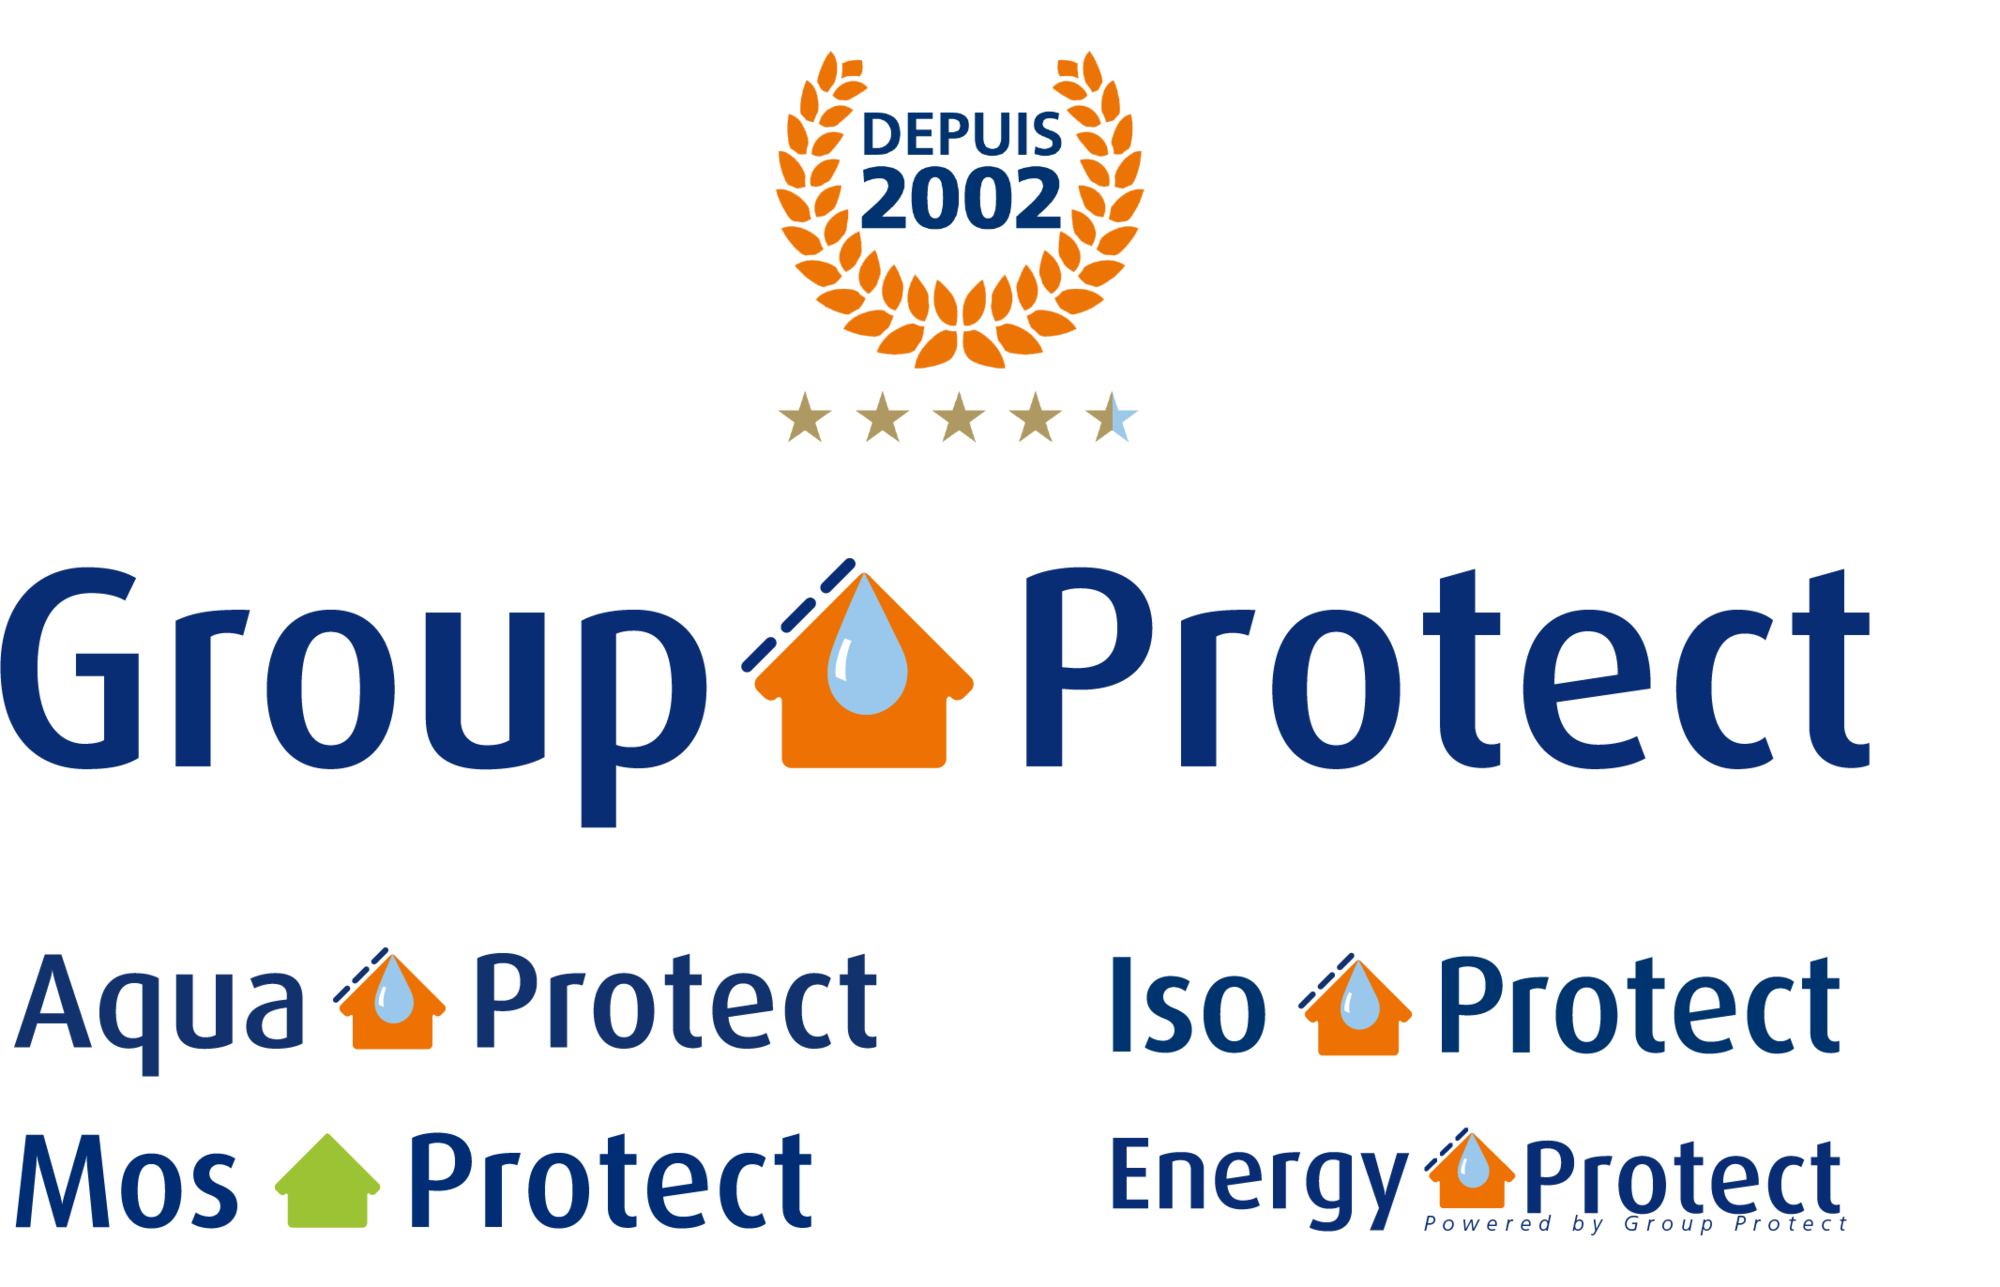 Une base solide - Energy Protect